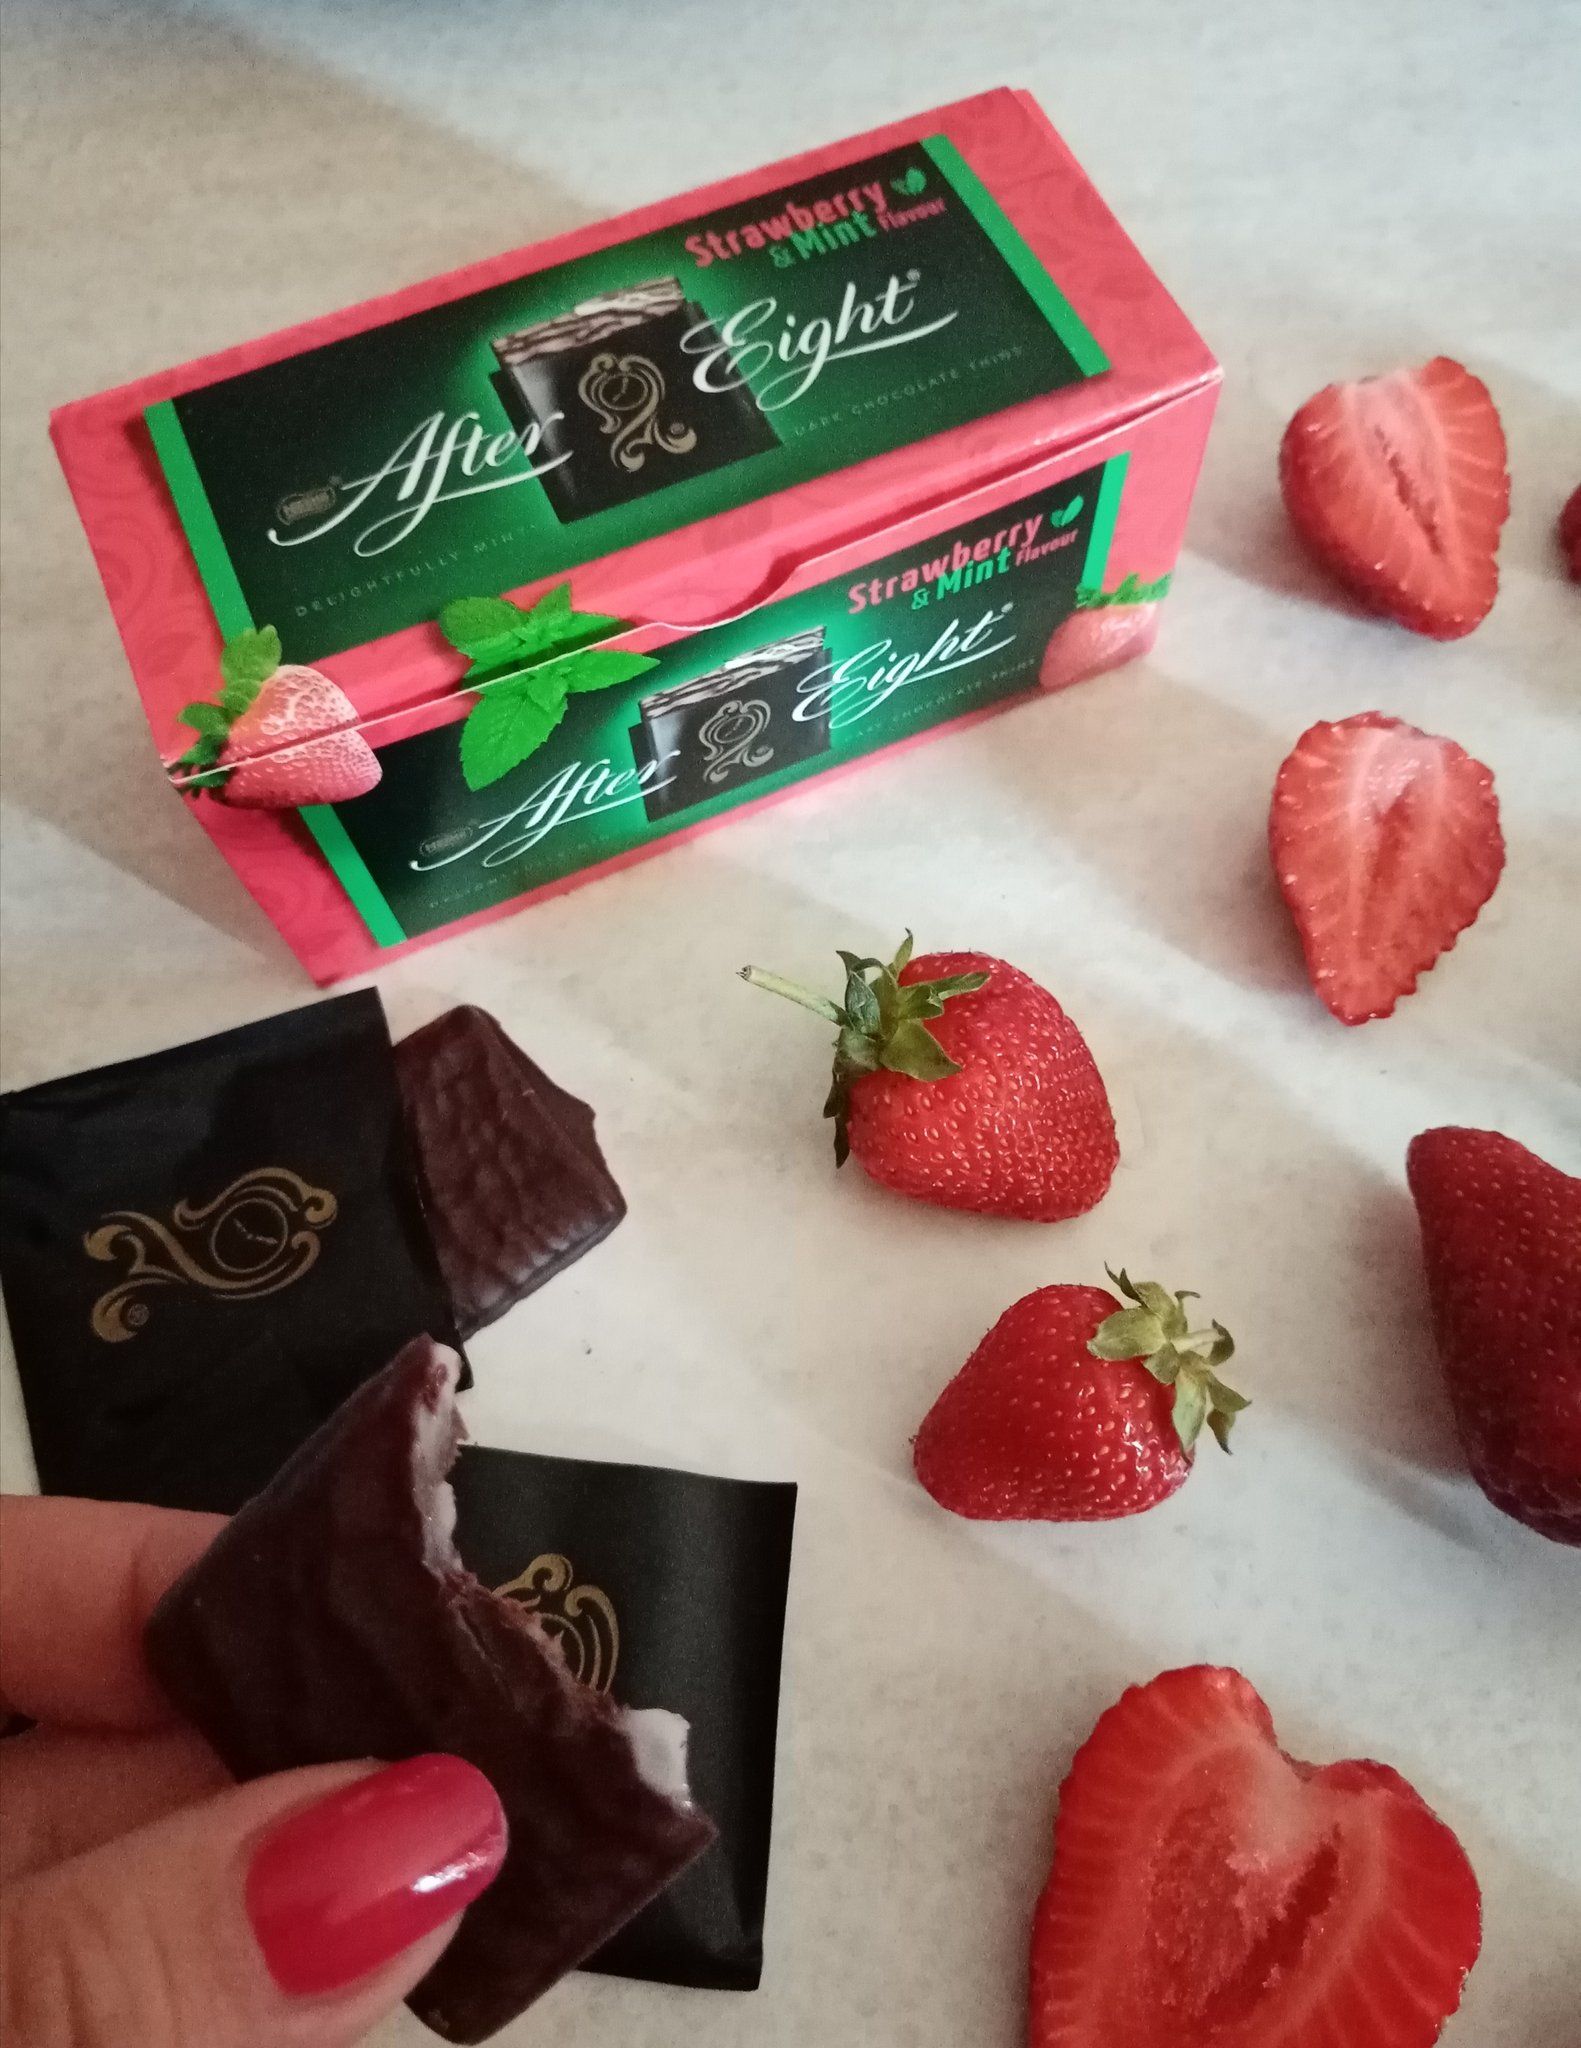 Annamaria Califano on X: After Eight with #Strawberry 🍓 mmmmh what a  great feel #taste #so #inRed #onMyTable #equinozioDelCuore #GoodMorning  #onMyMind #hard #days ? #positivityMotivation 🌼  /  X